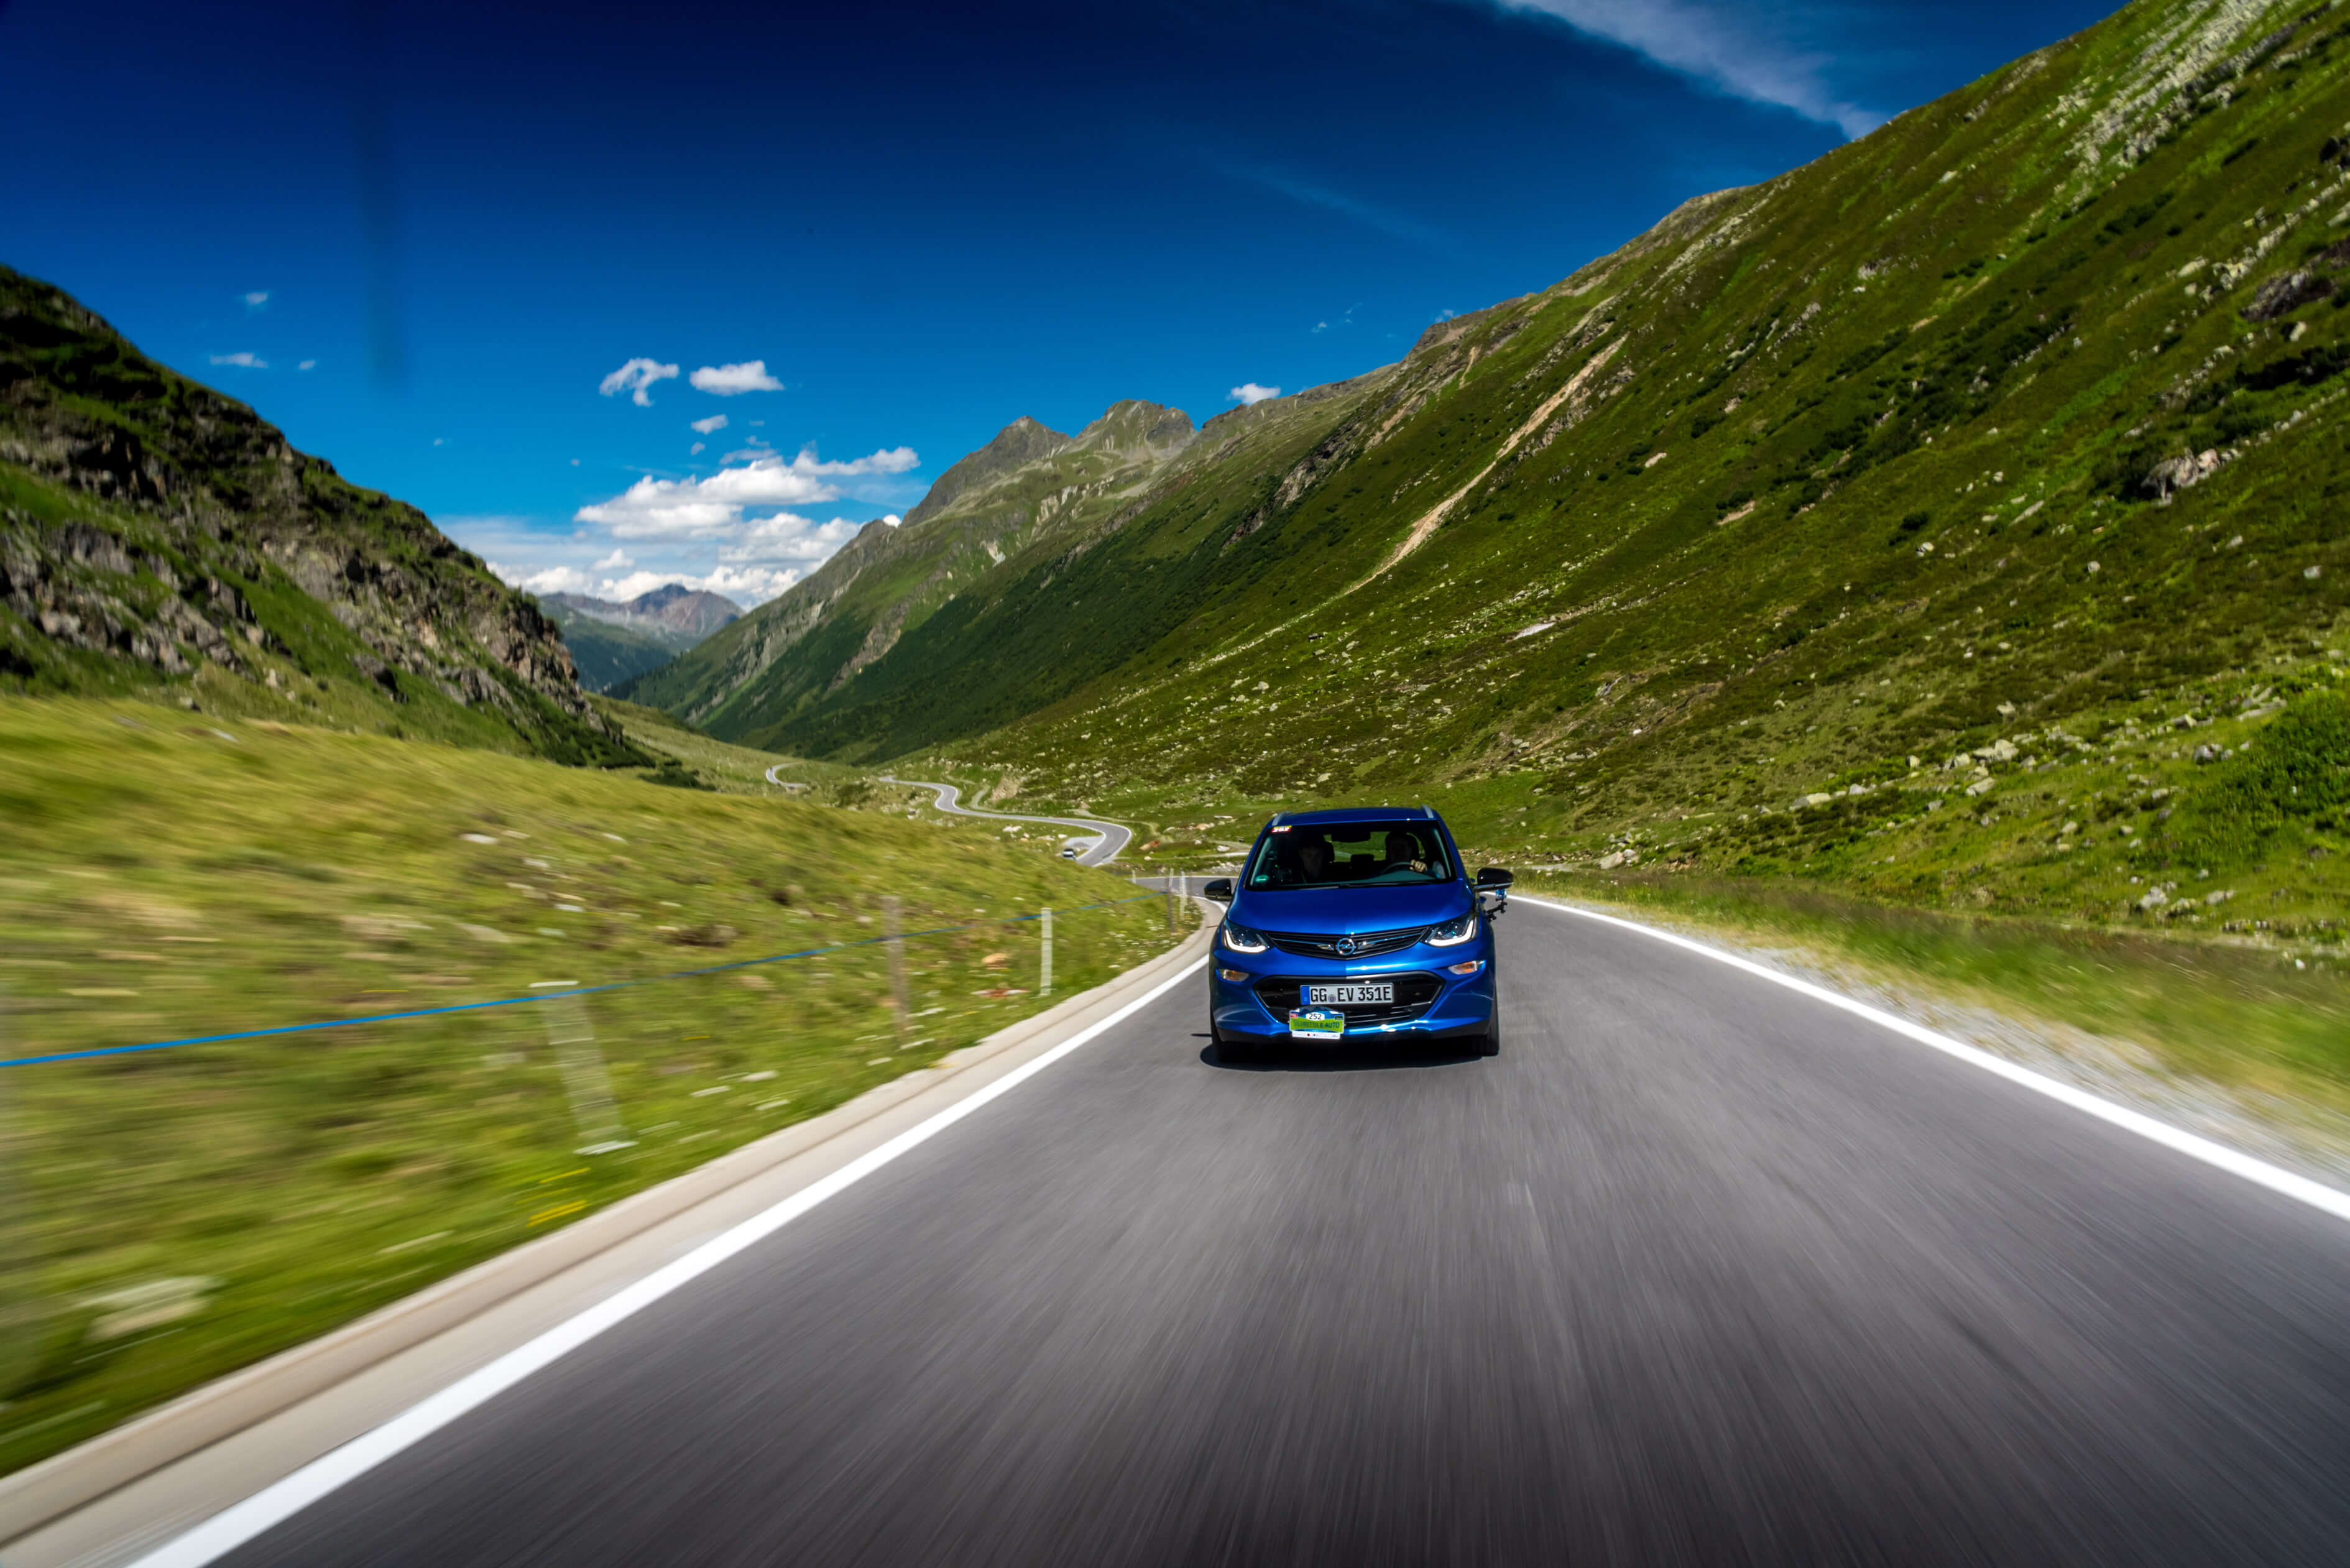 Something Old, Something New: Opel Commodore and Opel Ampera-e Shine in Austrian Alps